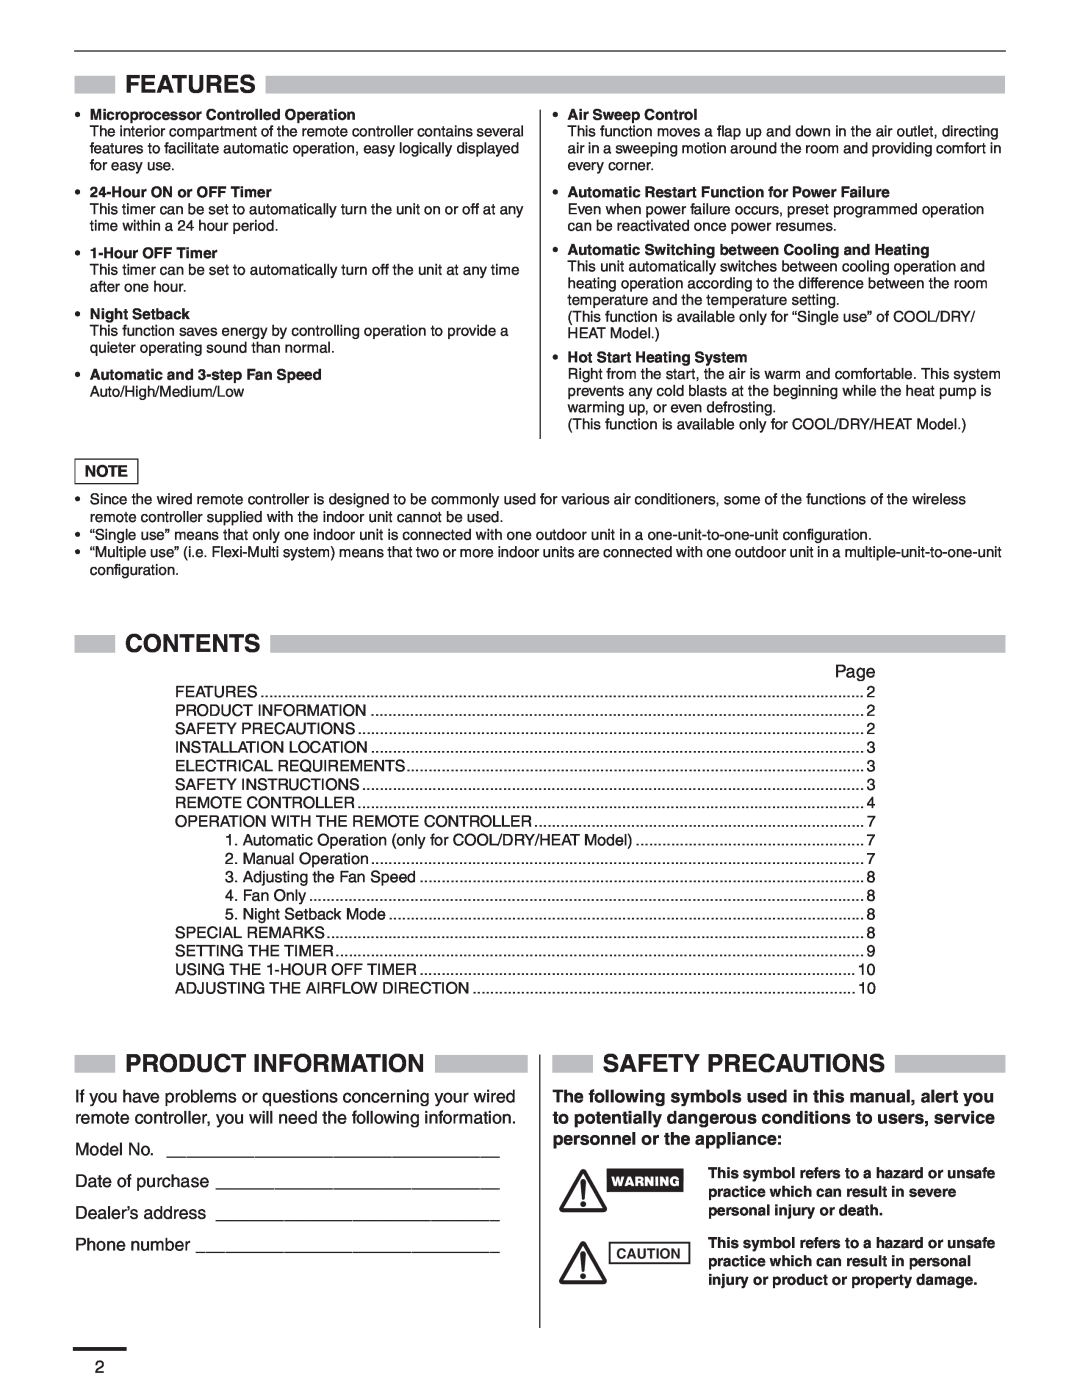 Panasonic R410A service manual Features, Contents, Product Information, Safety Precautions, Page, Model No, Phone number 